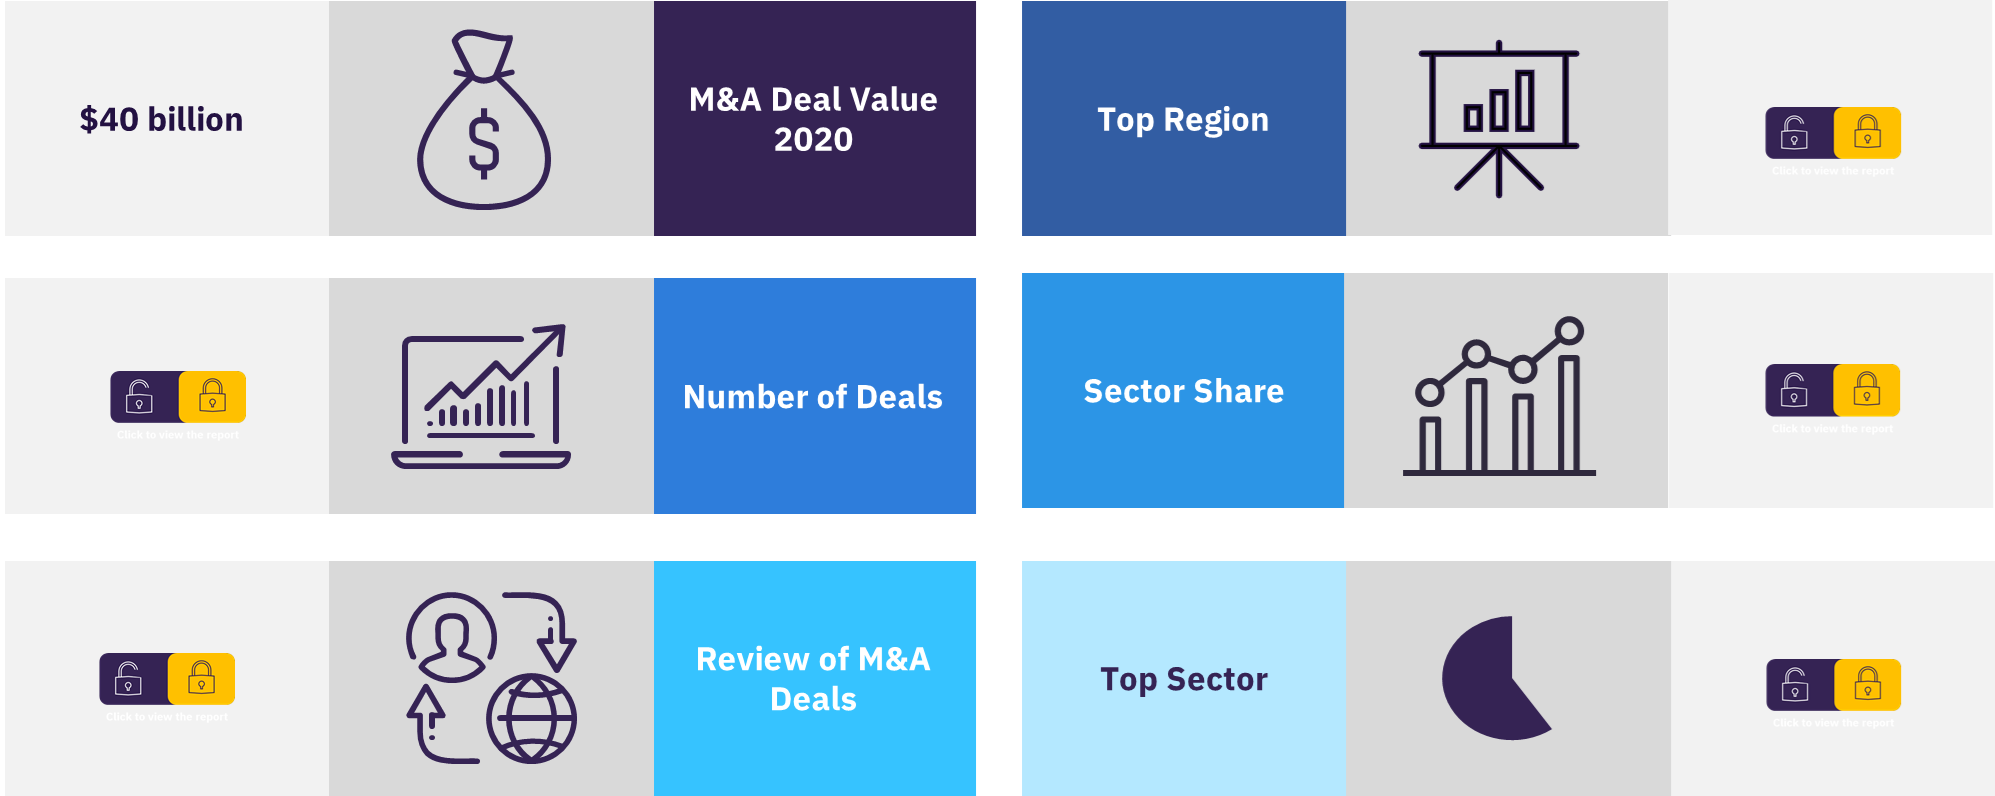 Overview of the global M&A deals in the automotive sector